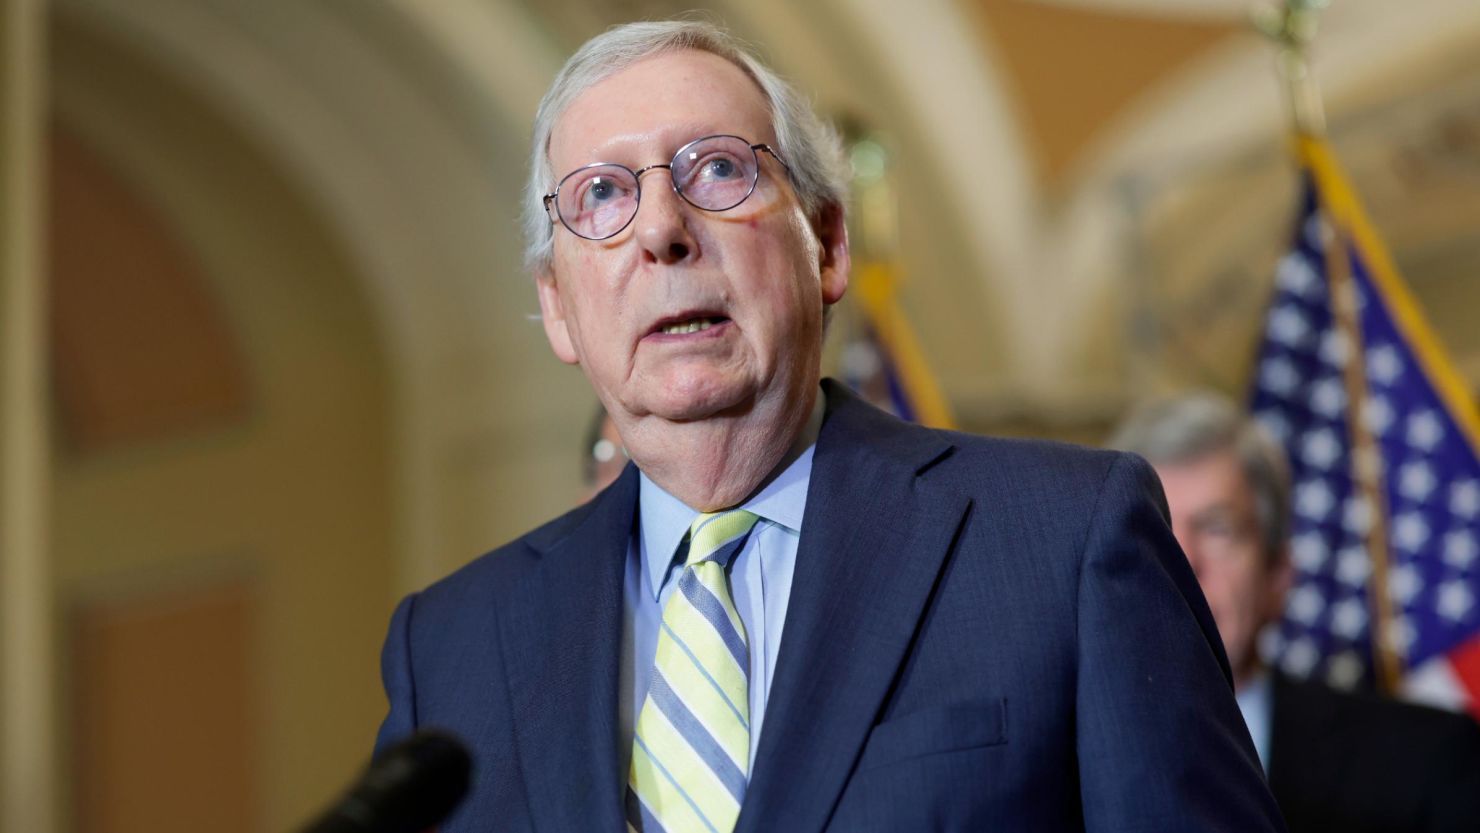 Senate Minority Leader Mitch McConnell (R-KY) speaks to reporters following the weekly Republican policy luncheons, on May 03, 2022 in Washington, DC. 